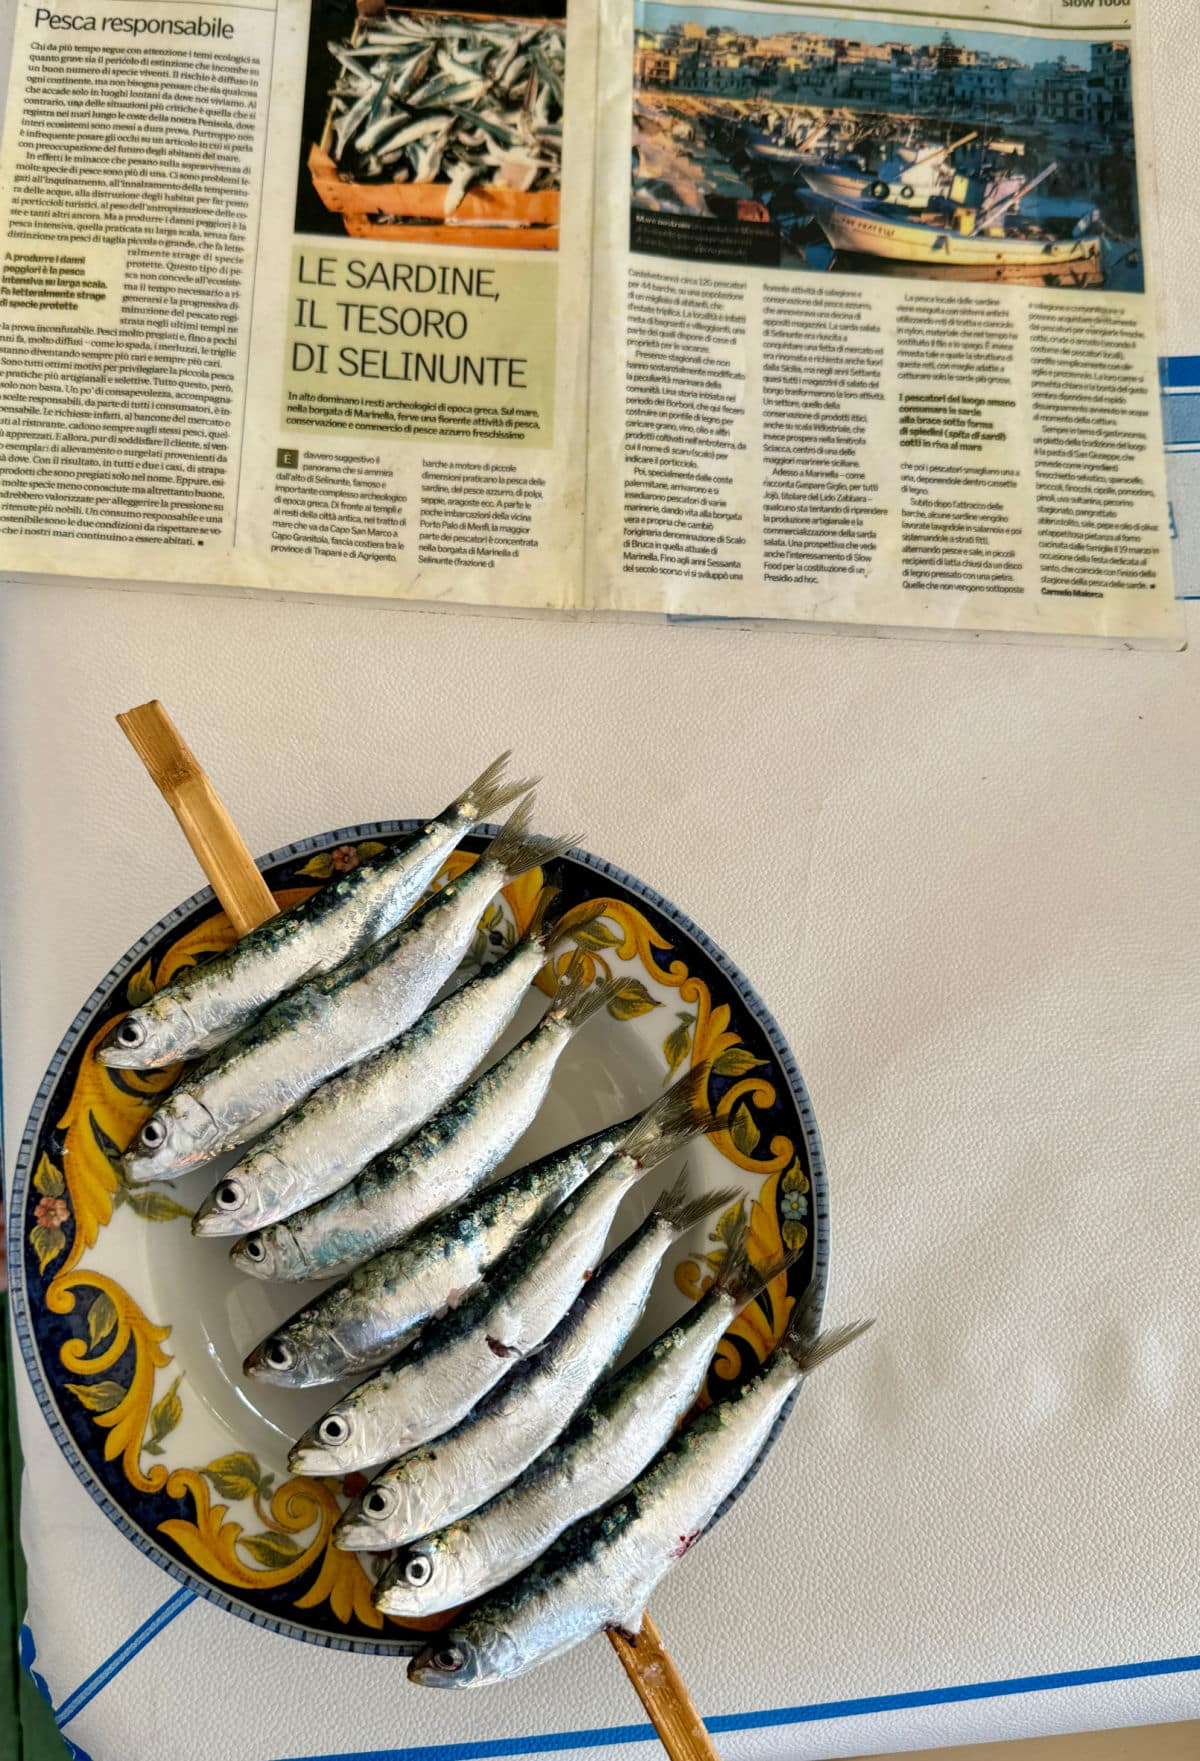 Sardines on skewer with newspaper article above.